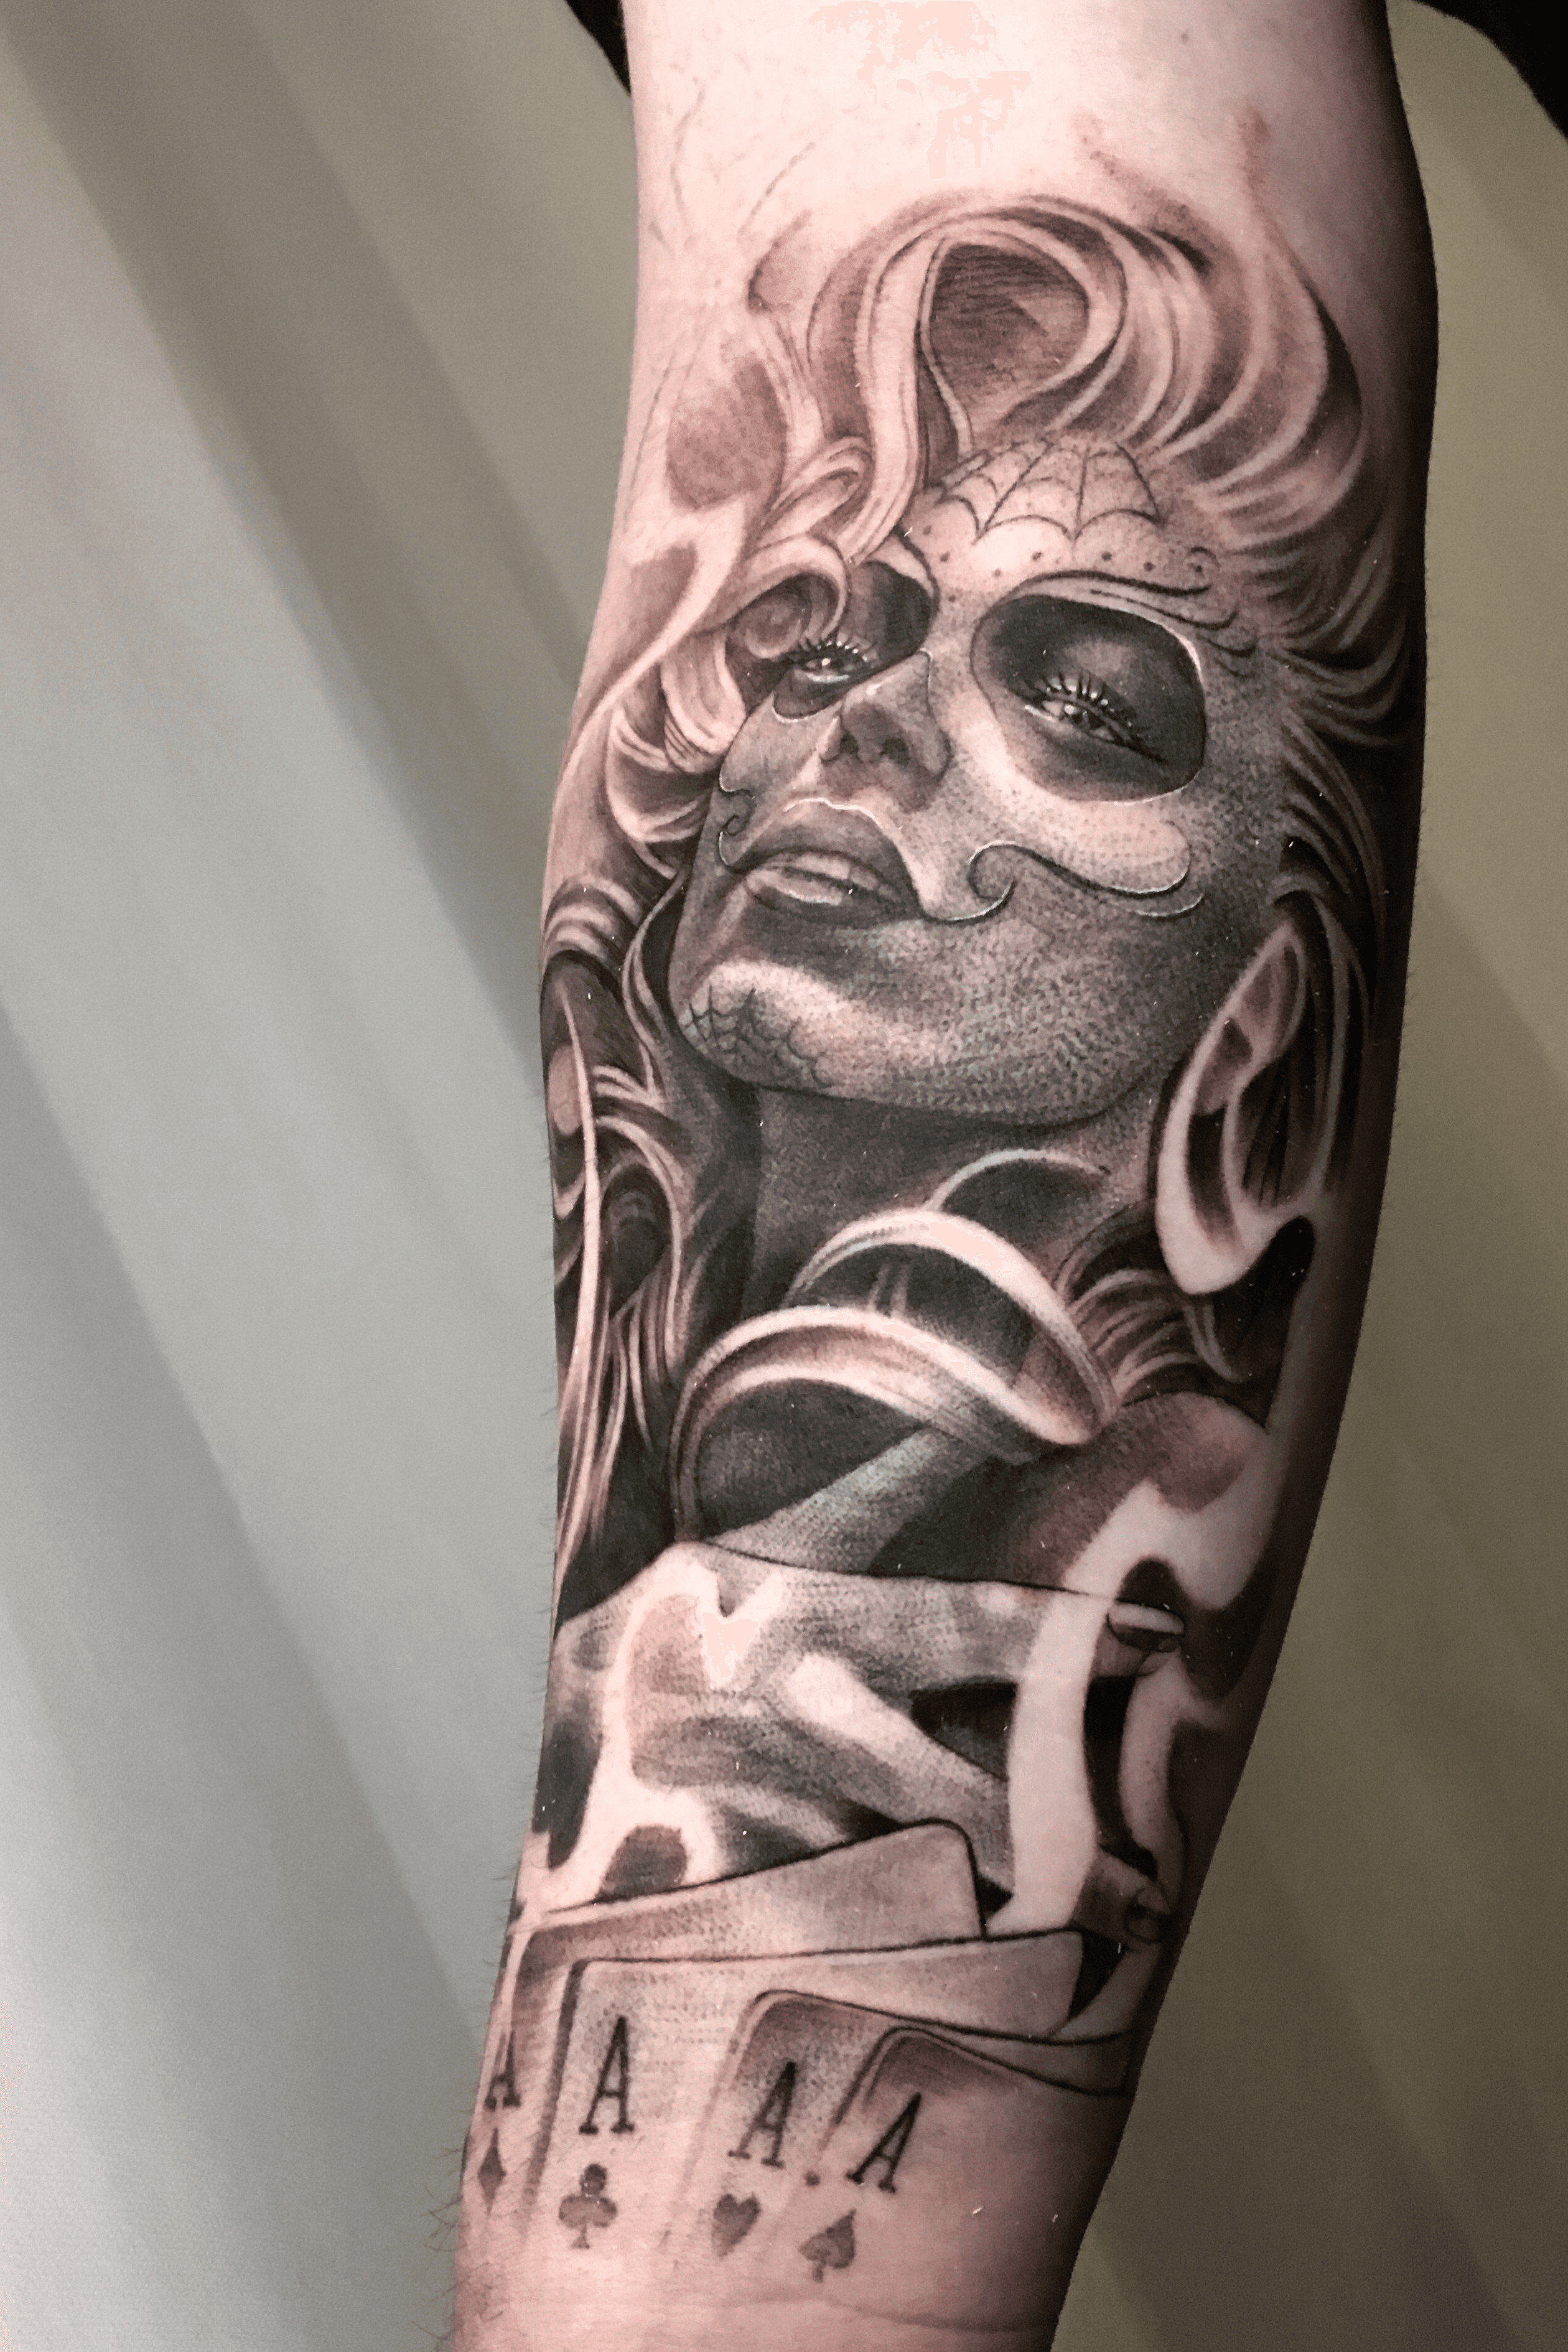 Pin on Black and Grey Tattoos and Full Sleeves by Alo Loco London UK